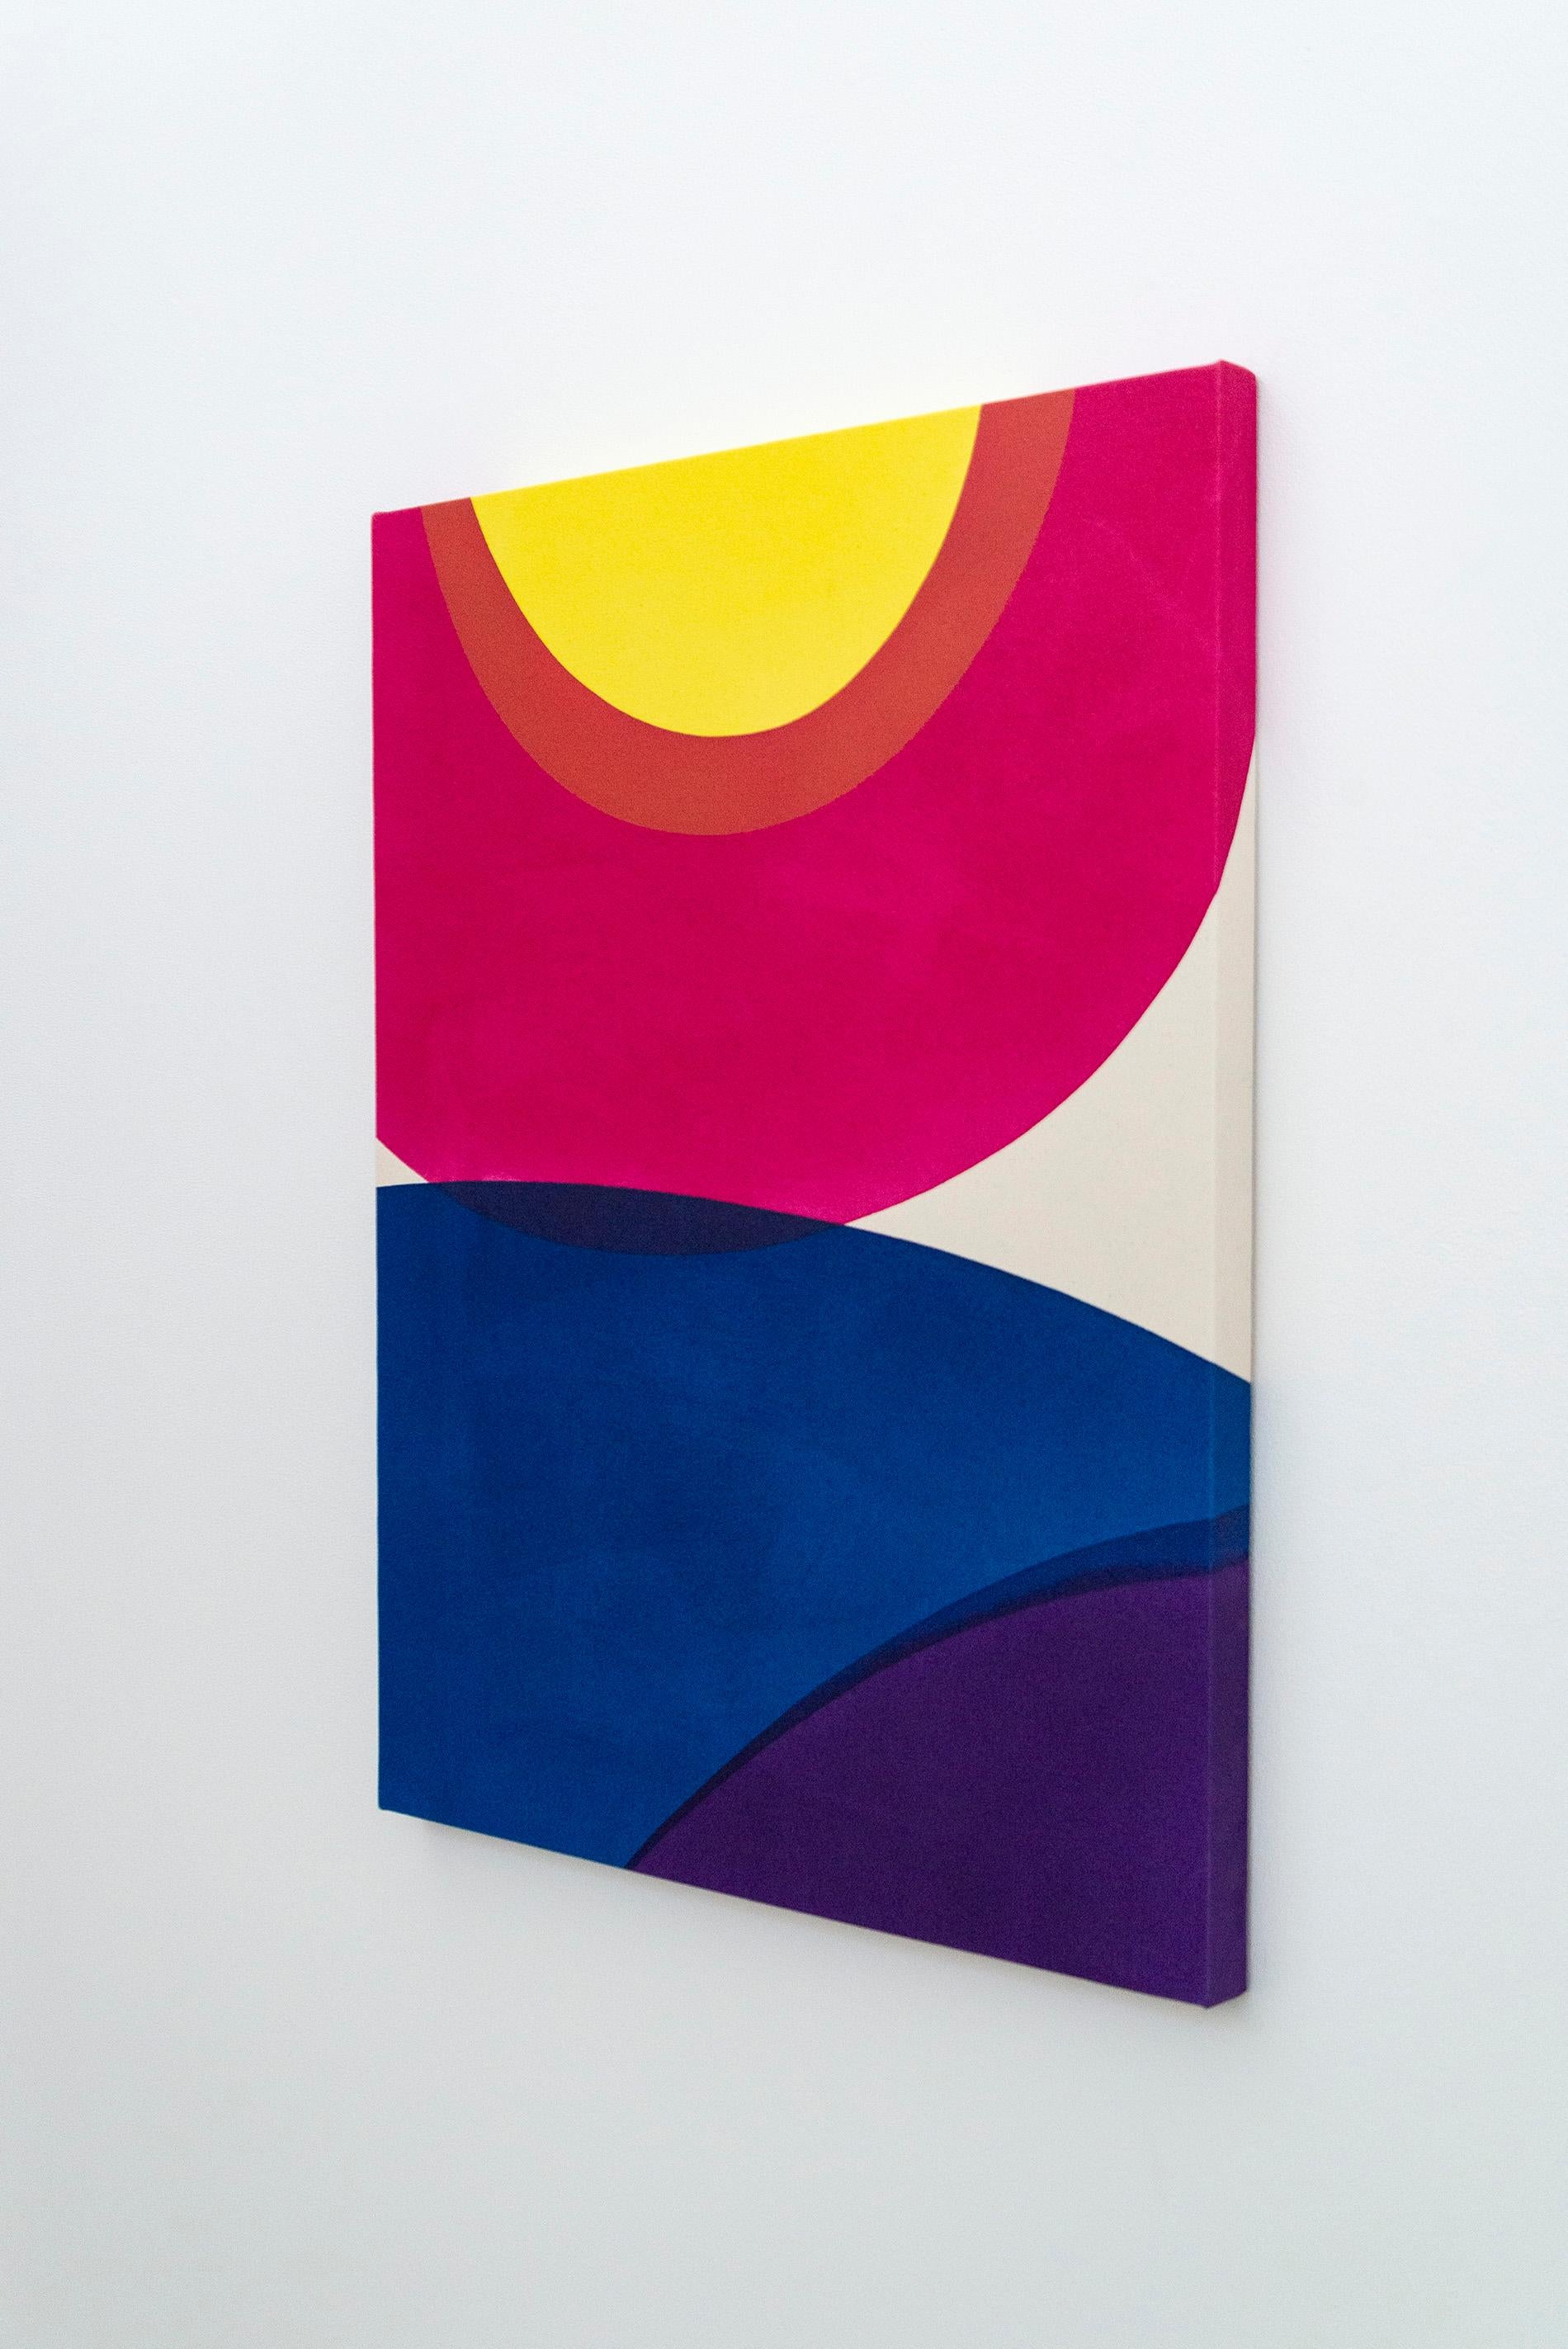 The colours are bright—yellow, pink, deep blue, the shapes pure and the relationships dynamic. This is Aron Hill, a Calgary artist. In this playful composition swaths of transparent colour overlap, a sun-shaped form appears, white space plays off